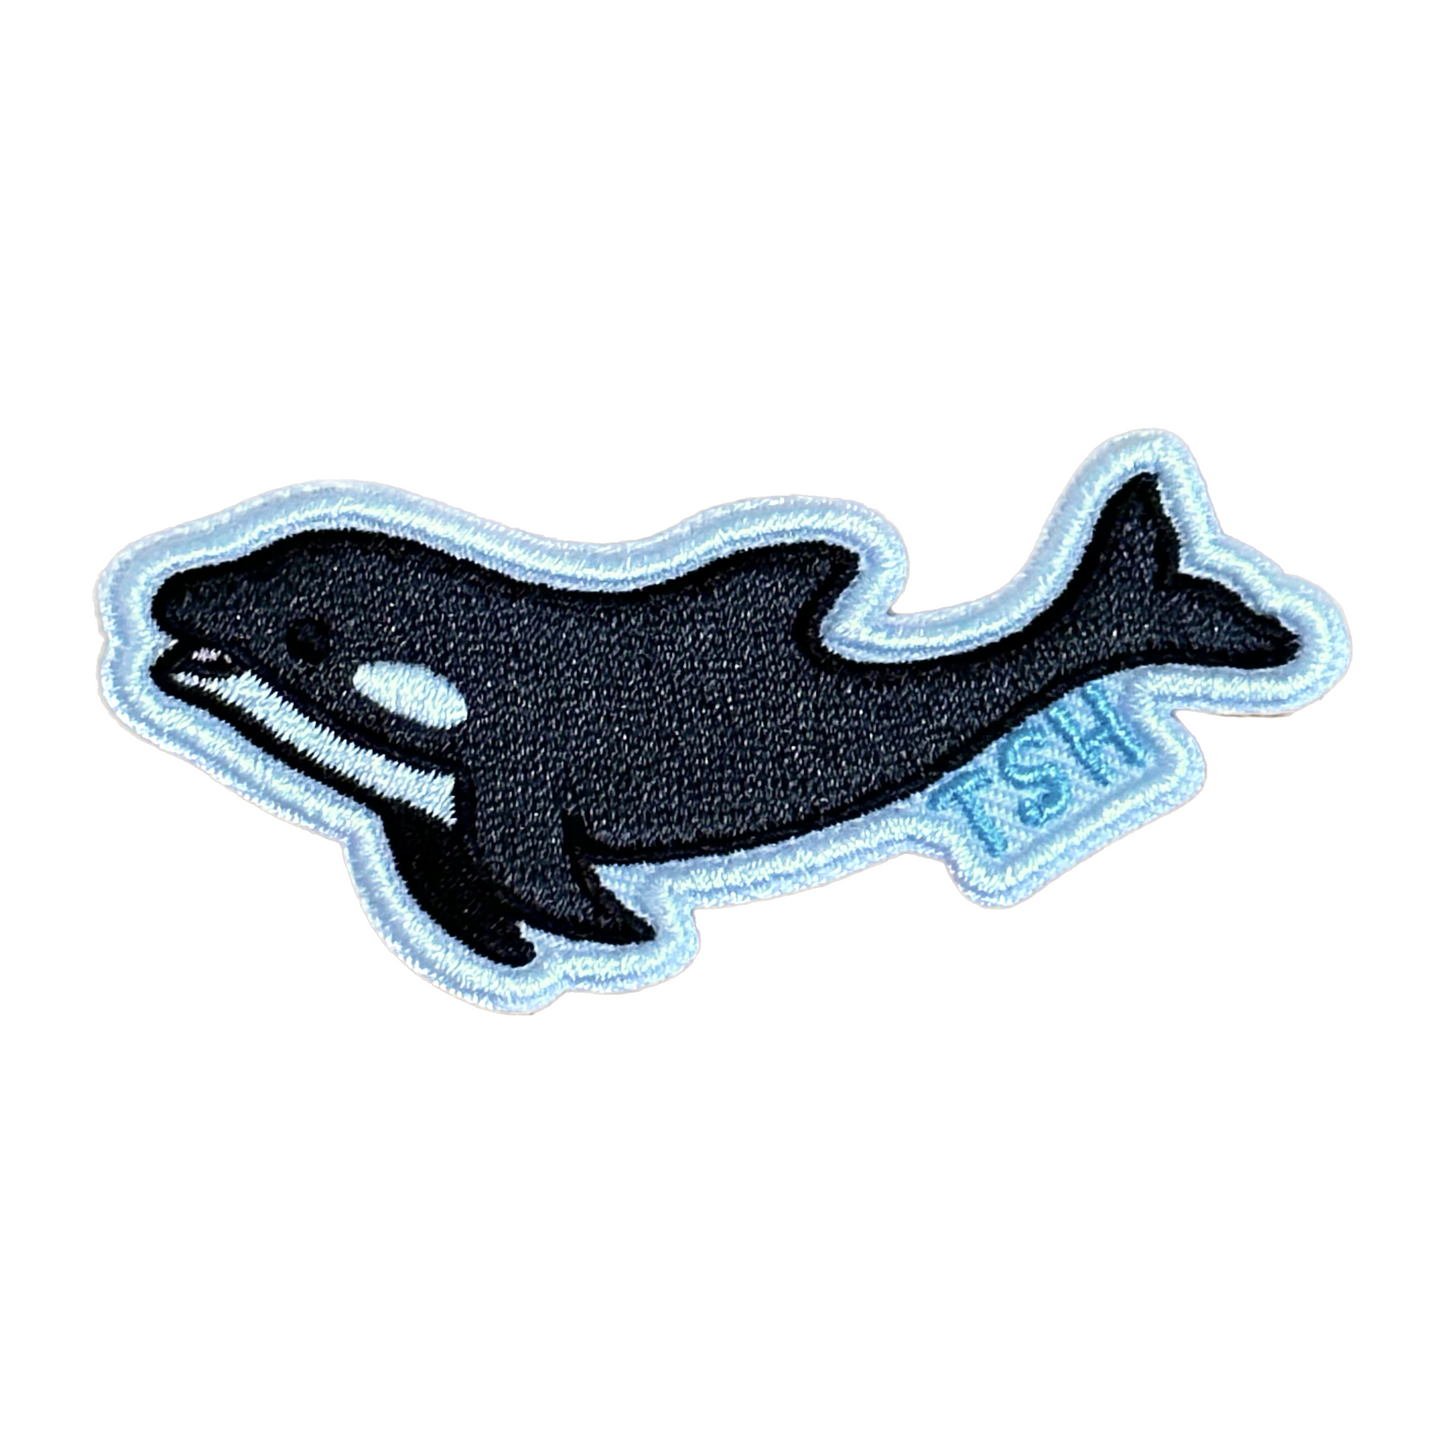 Orca Whale Patch